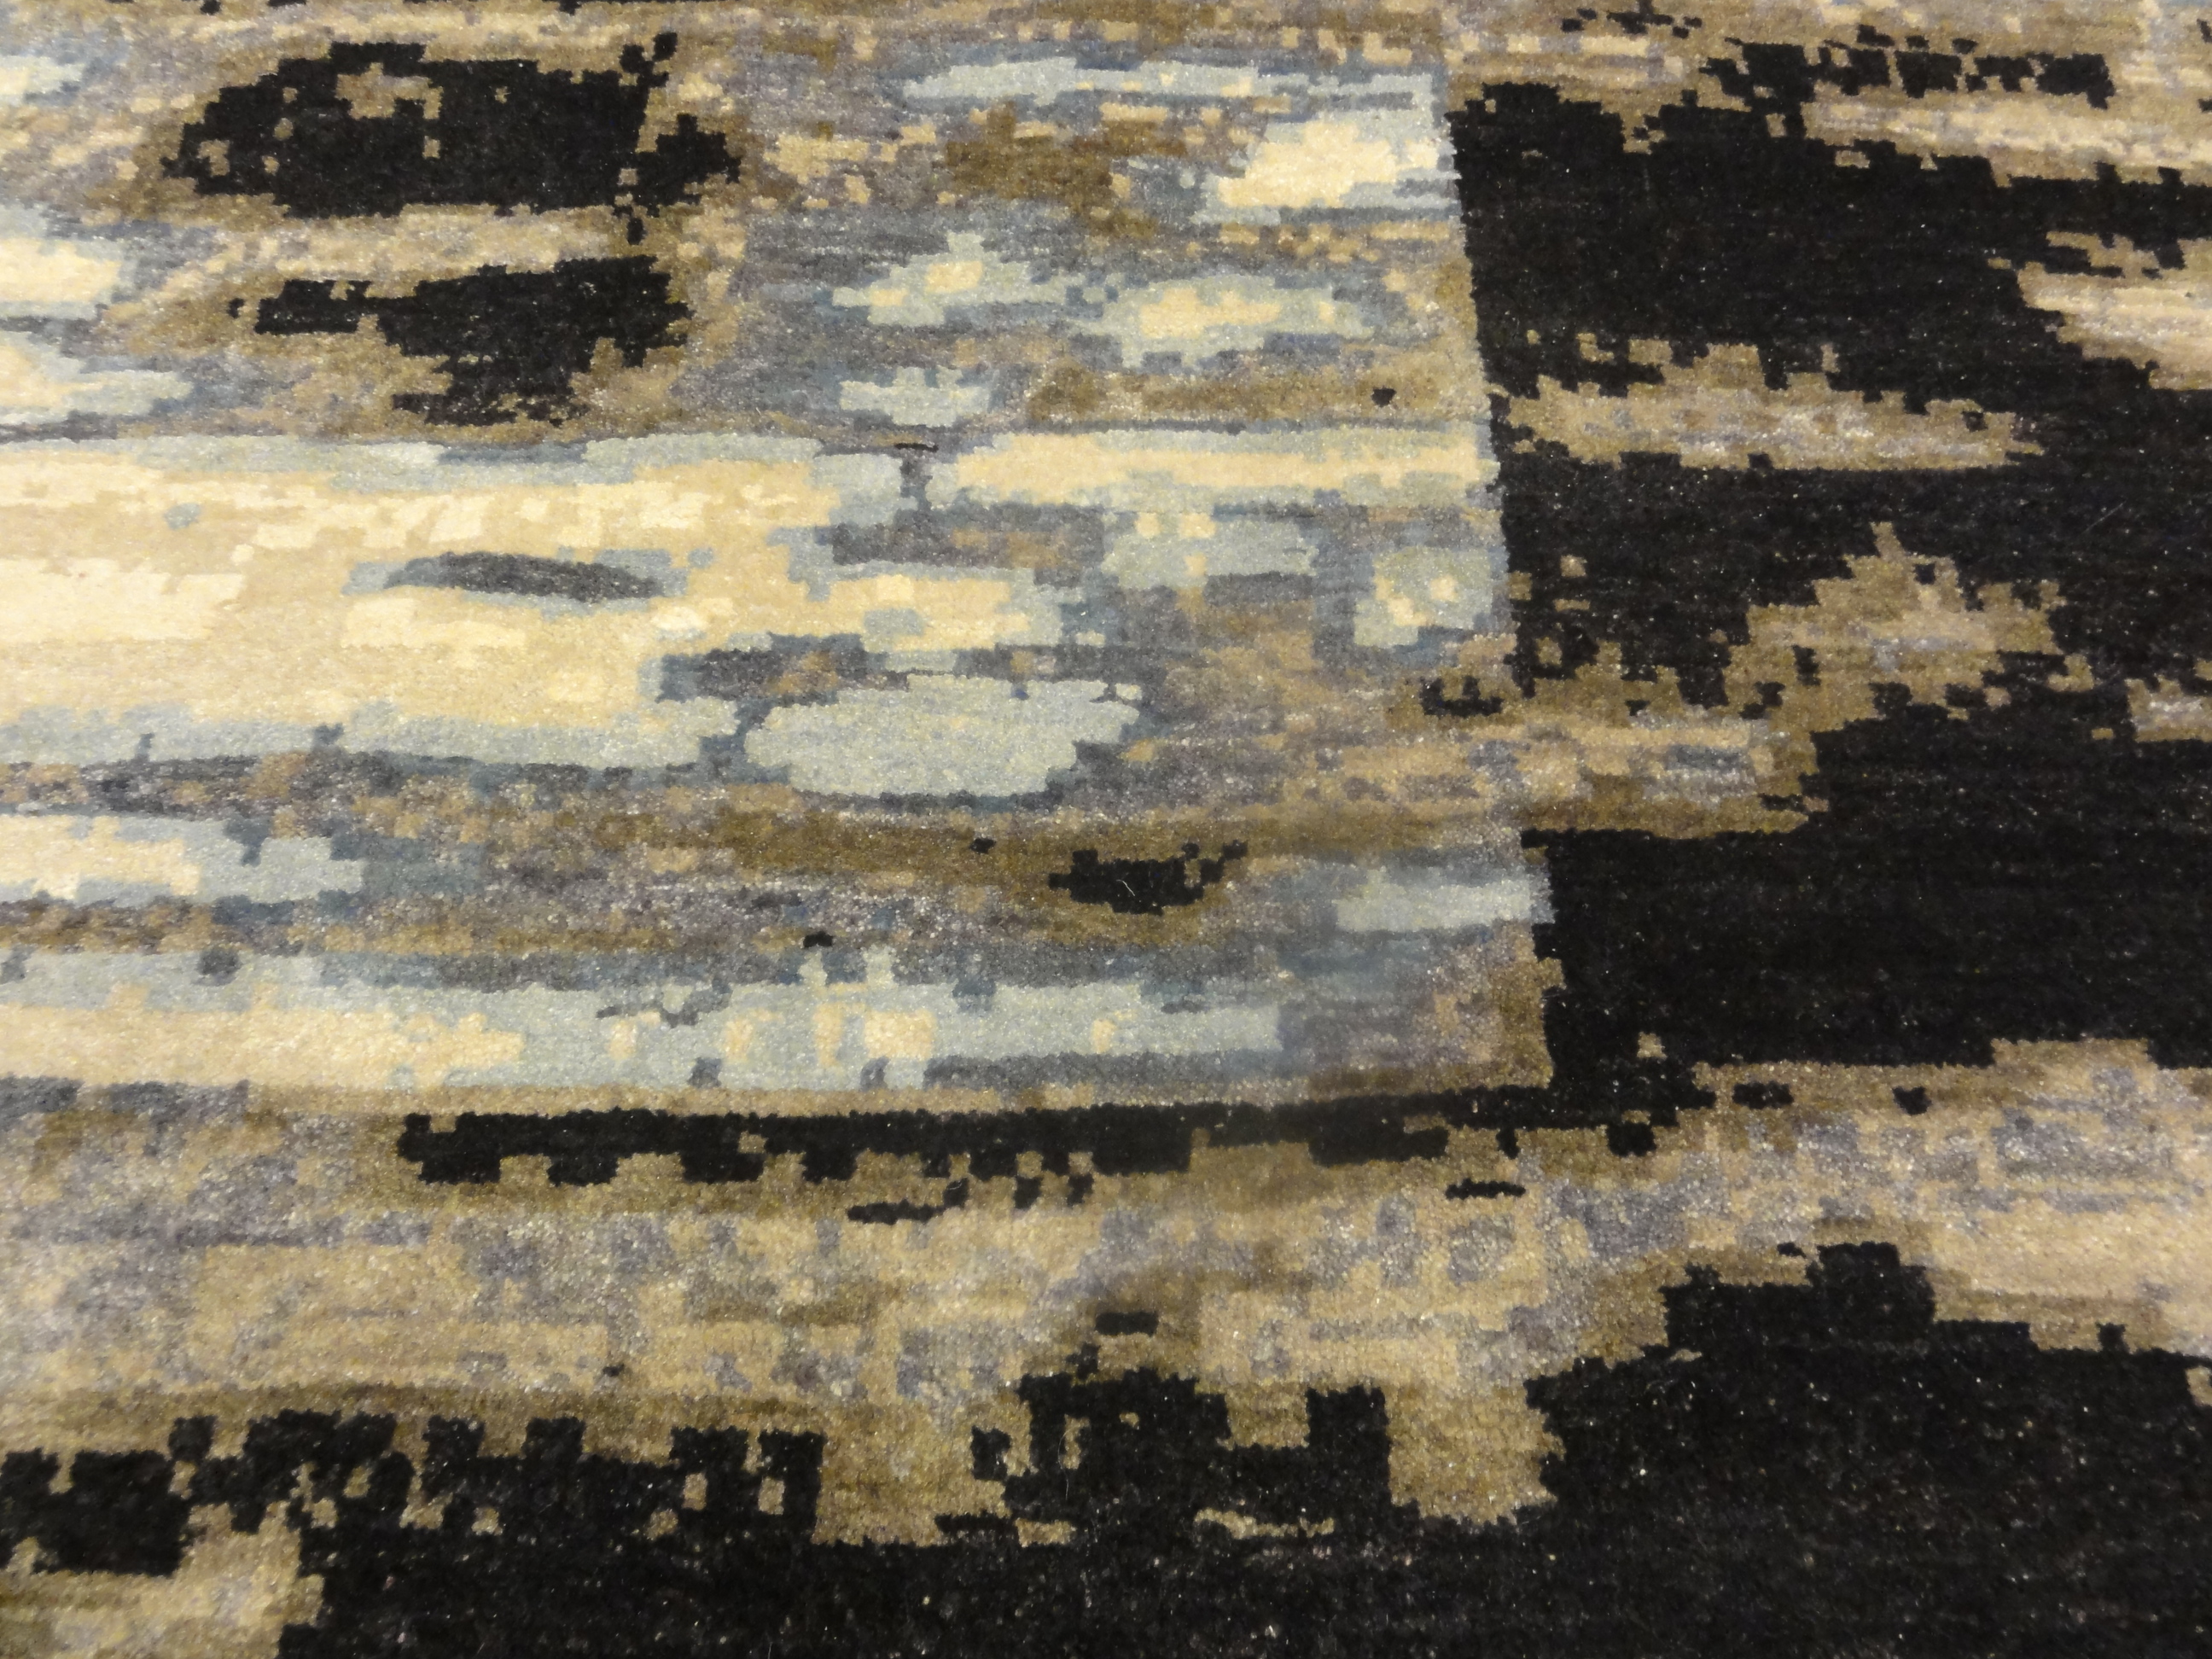 Ayka Modern Rug 30333. A piece of genuine woven carpet art sold by Santa Barbara Design Center and Rugs and More. A unique modern rug.